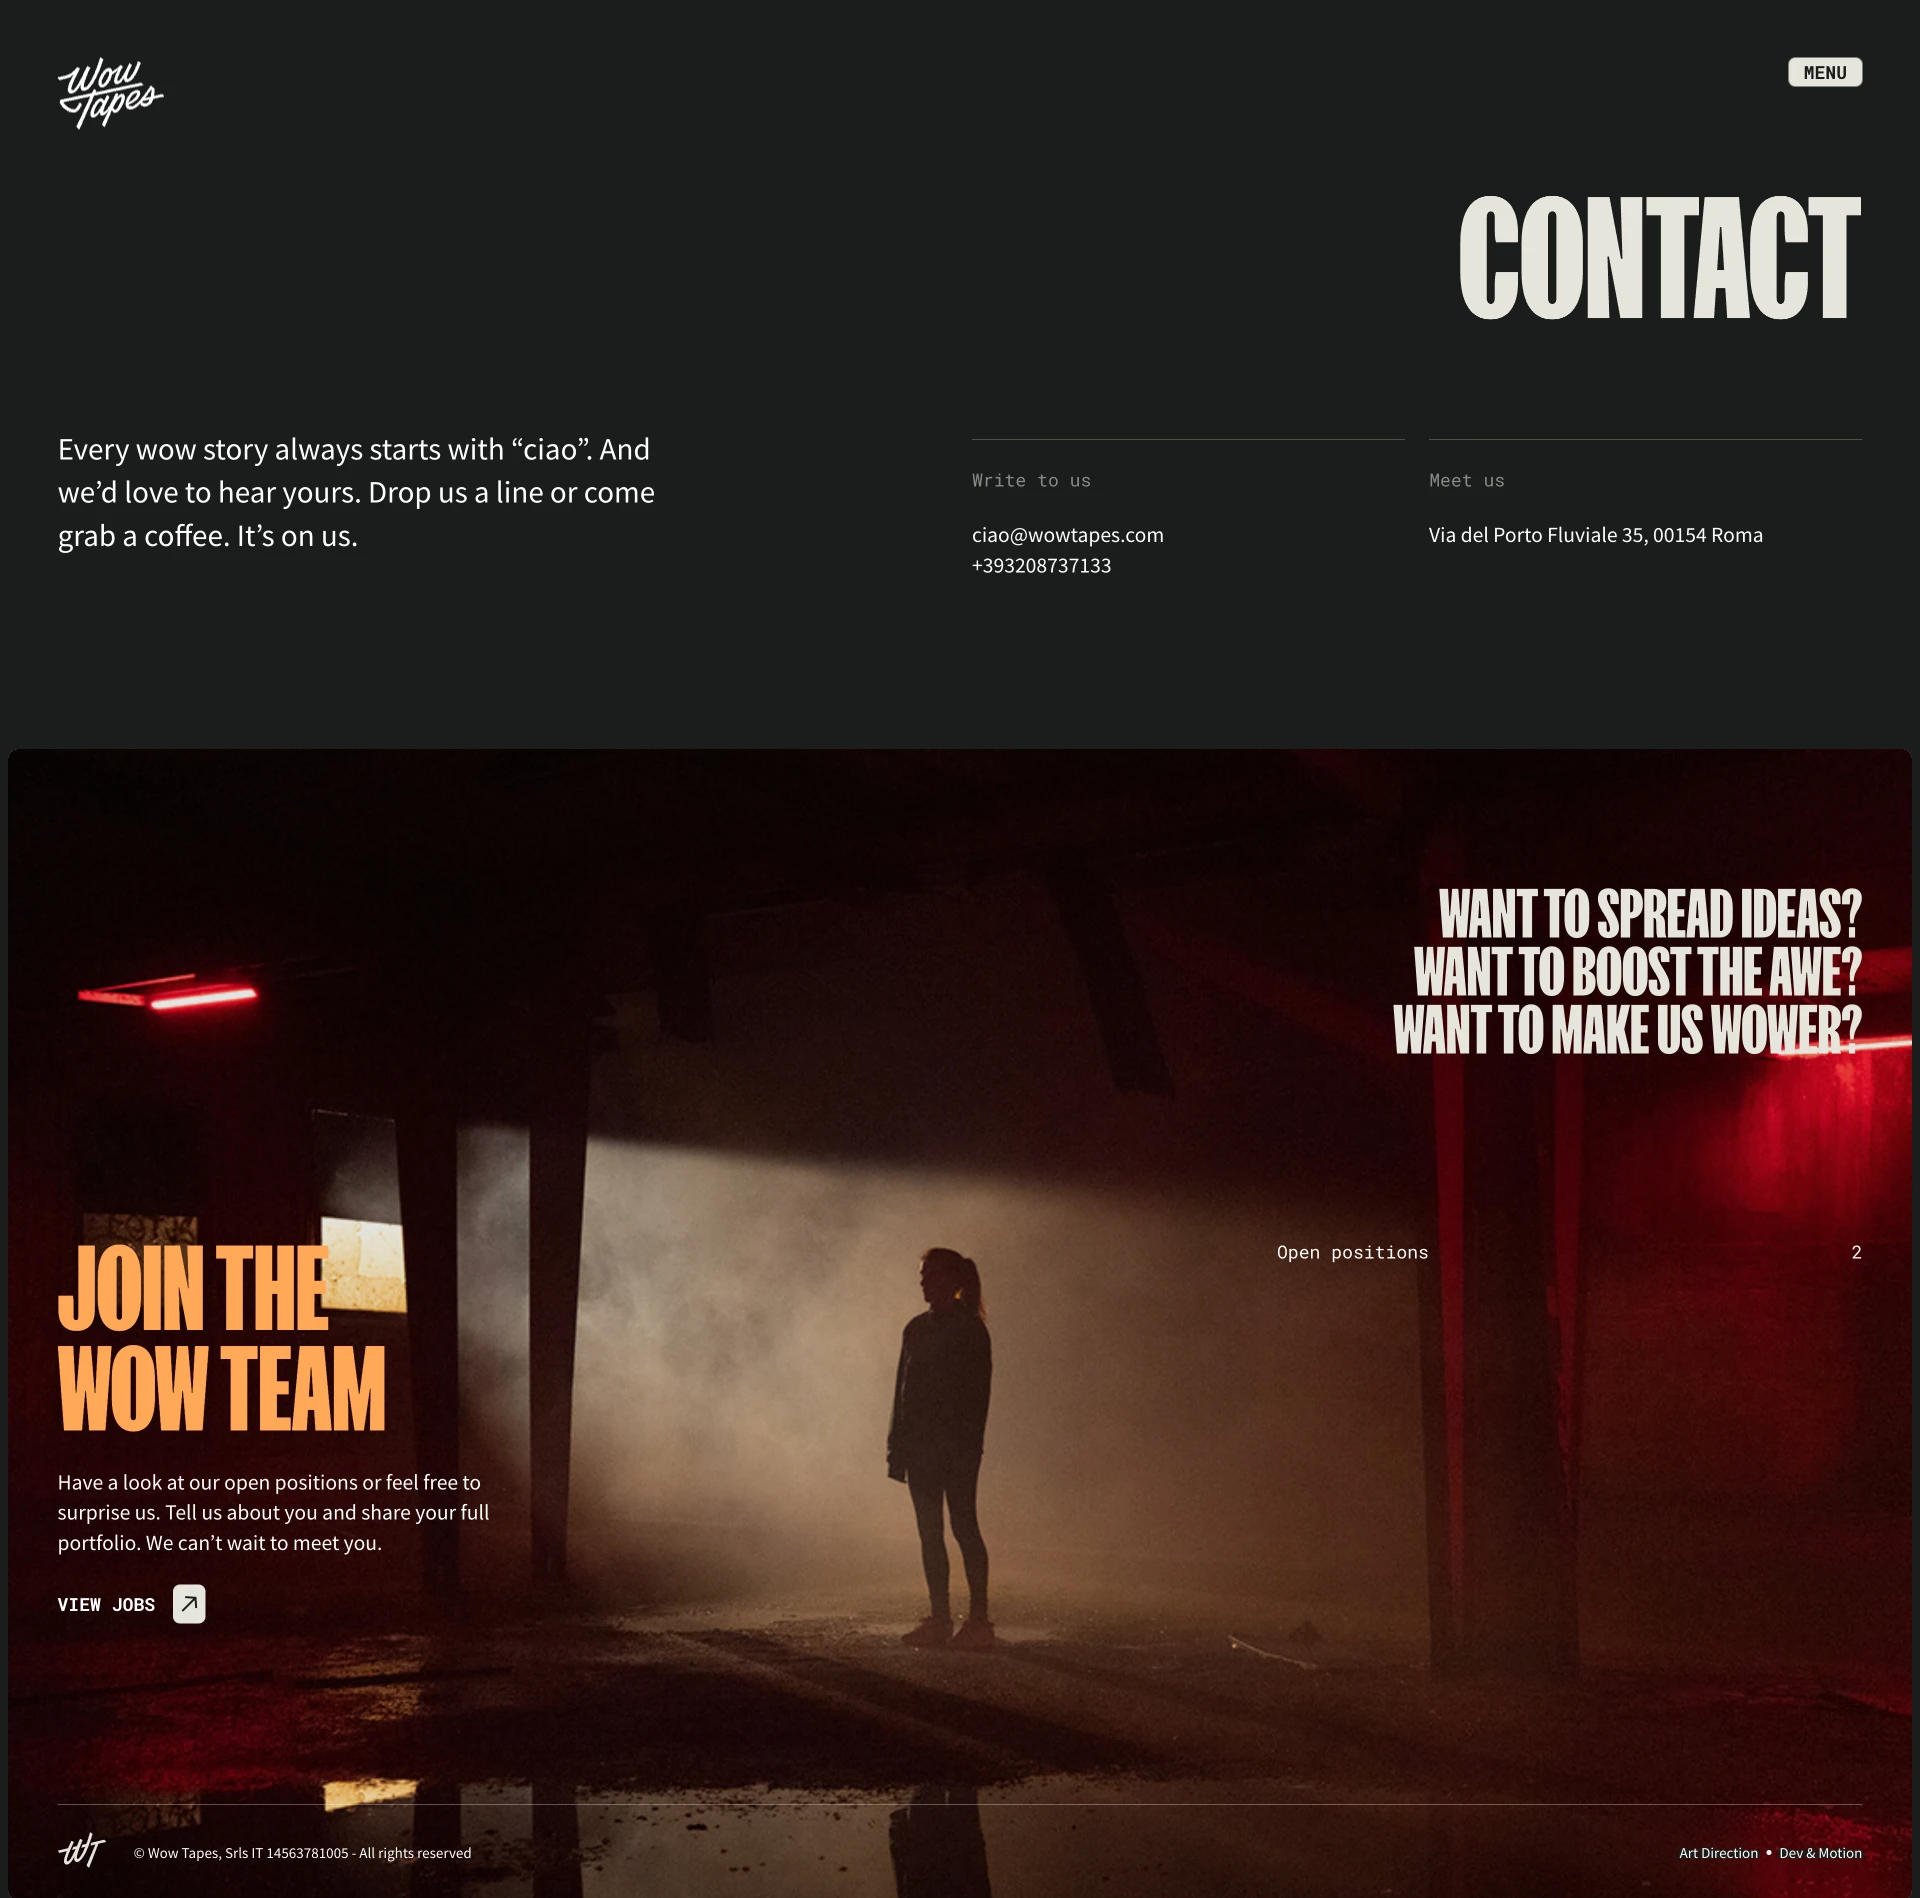 Wow Tapes Landing Page Example: Wow Tapes is an award winning creative studio based in Rome, focused on film production. We craft jaw-dropping stories for brands that aim to impress their audience. Tell us about your project and let’s wow together.